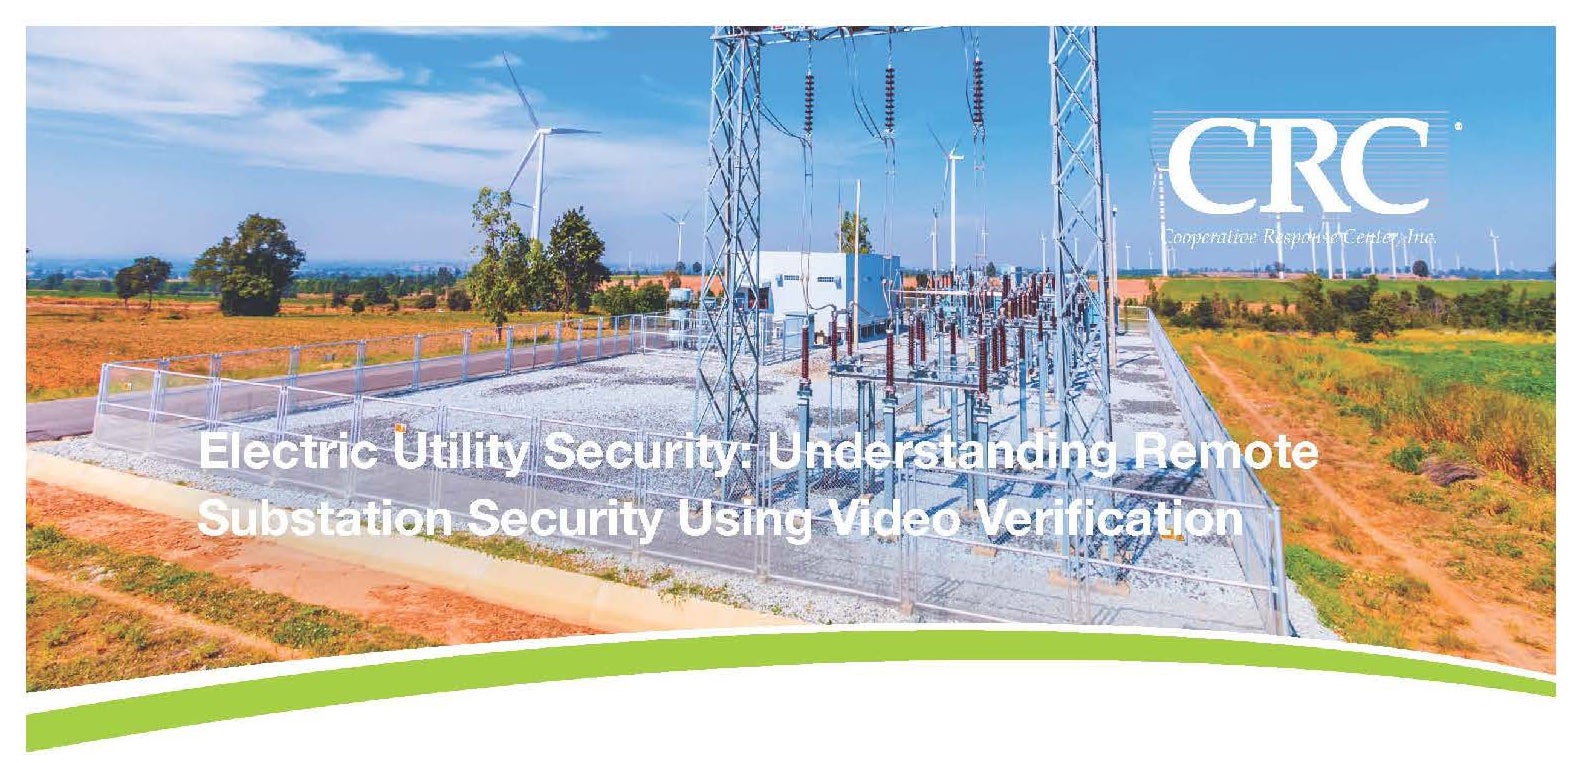 Electric Utility Security: Understanding Remote Substation Security Using Video Verification